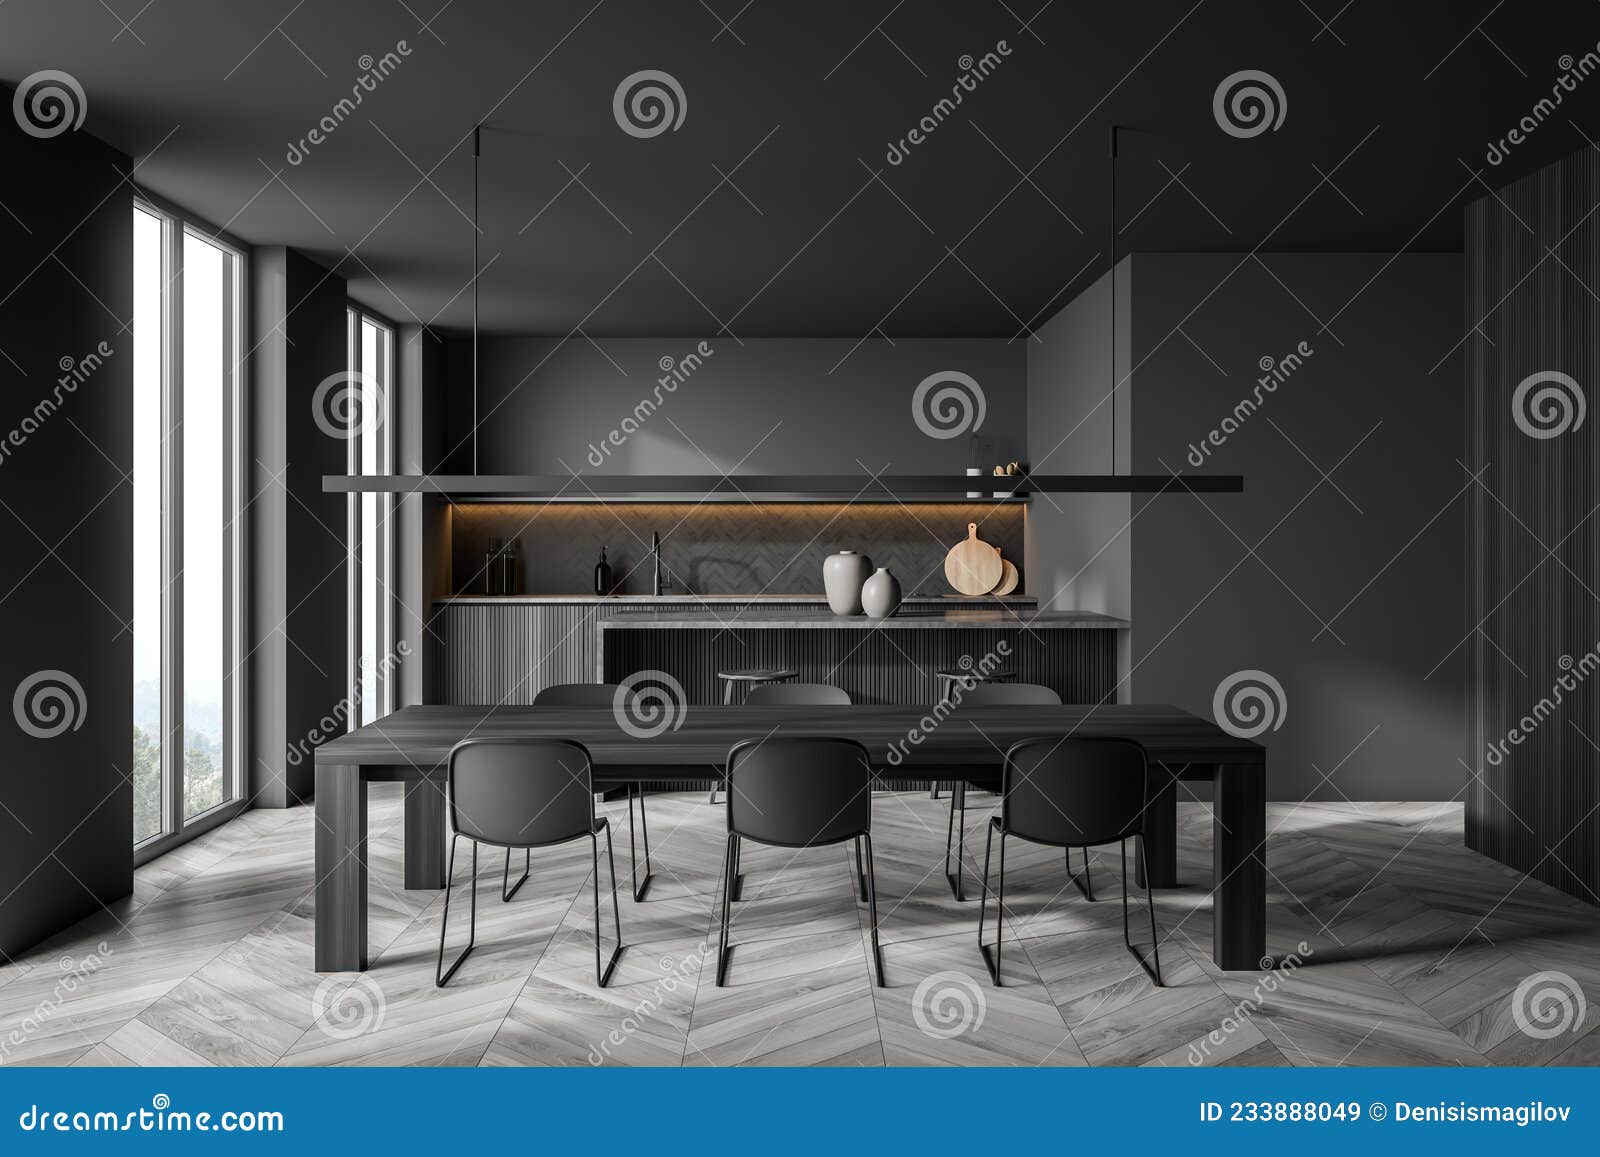 Dark Grey Dining Room With Linear Light And Illuminated Kitchen On  Background Stock Illustration - Illustration Of Light, Kitchen: 233888049